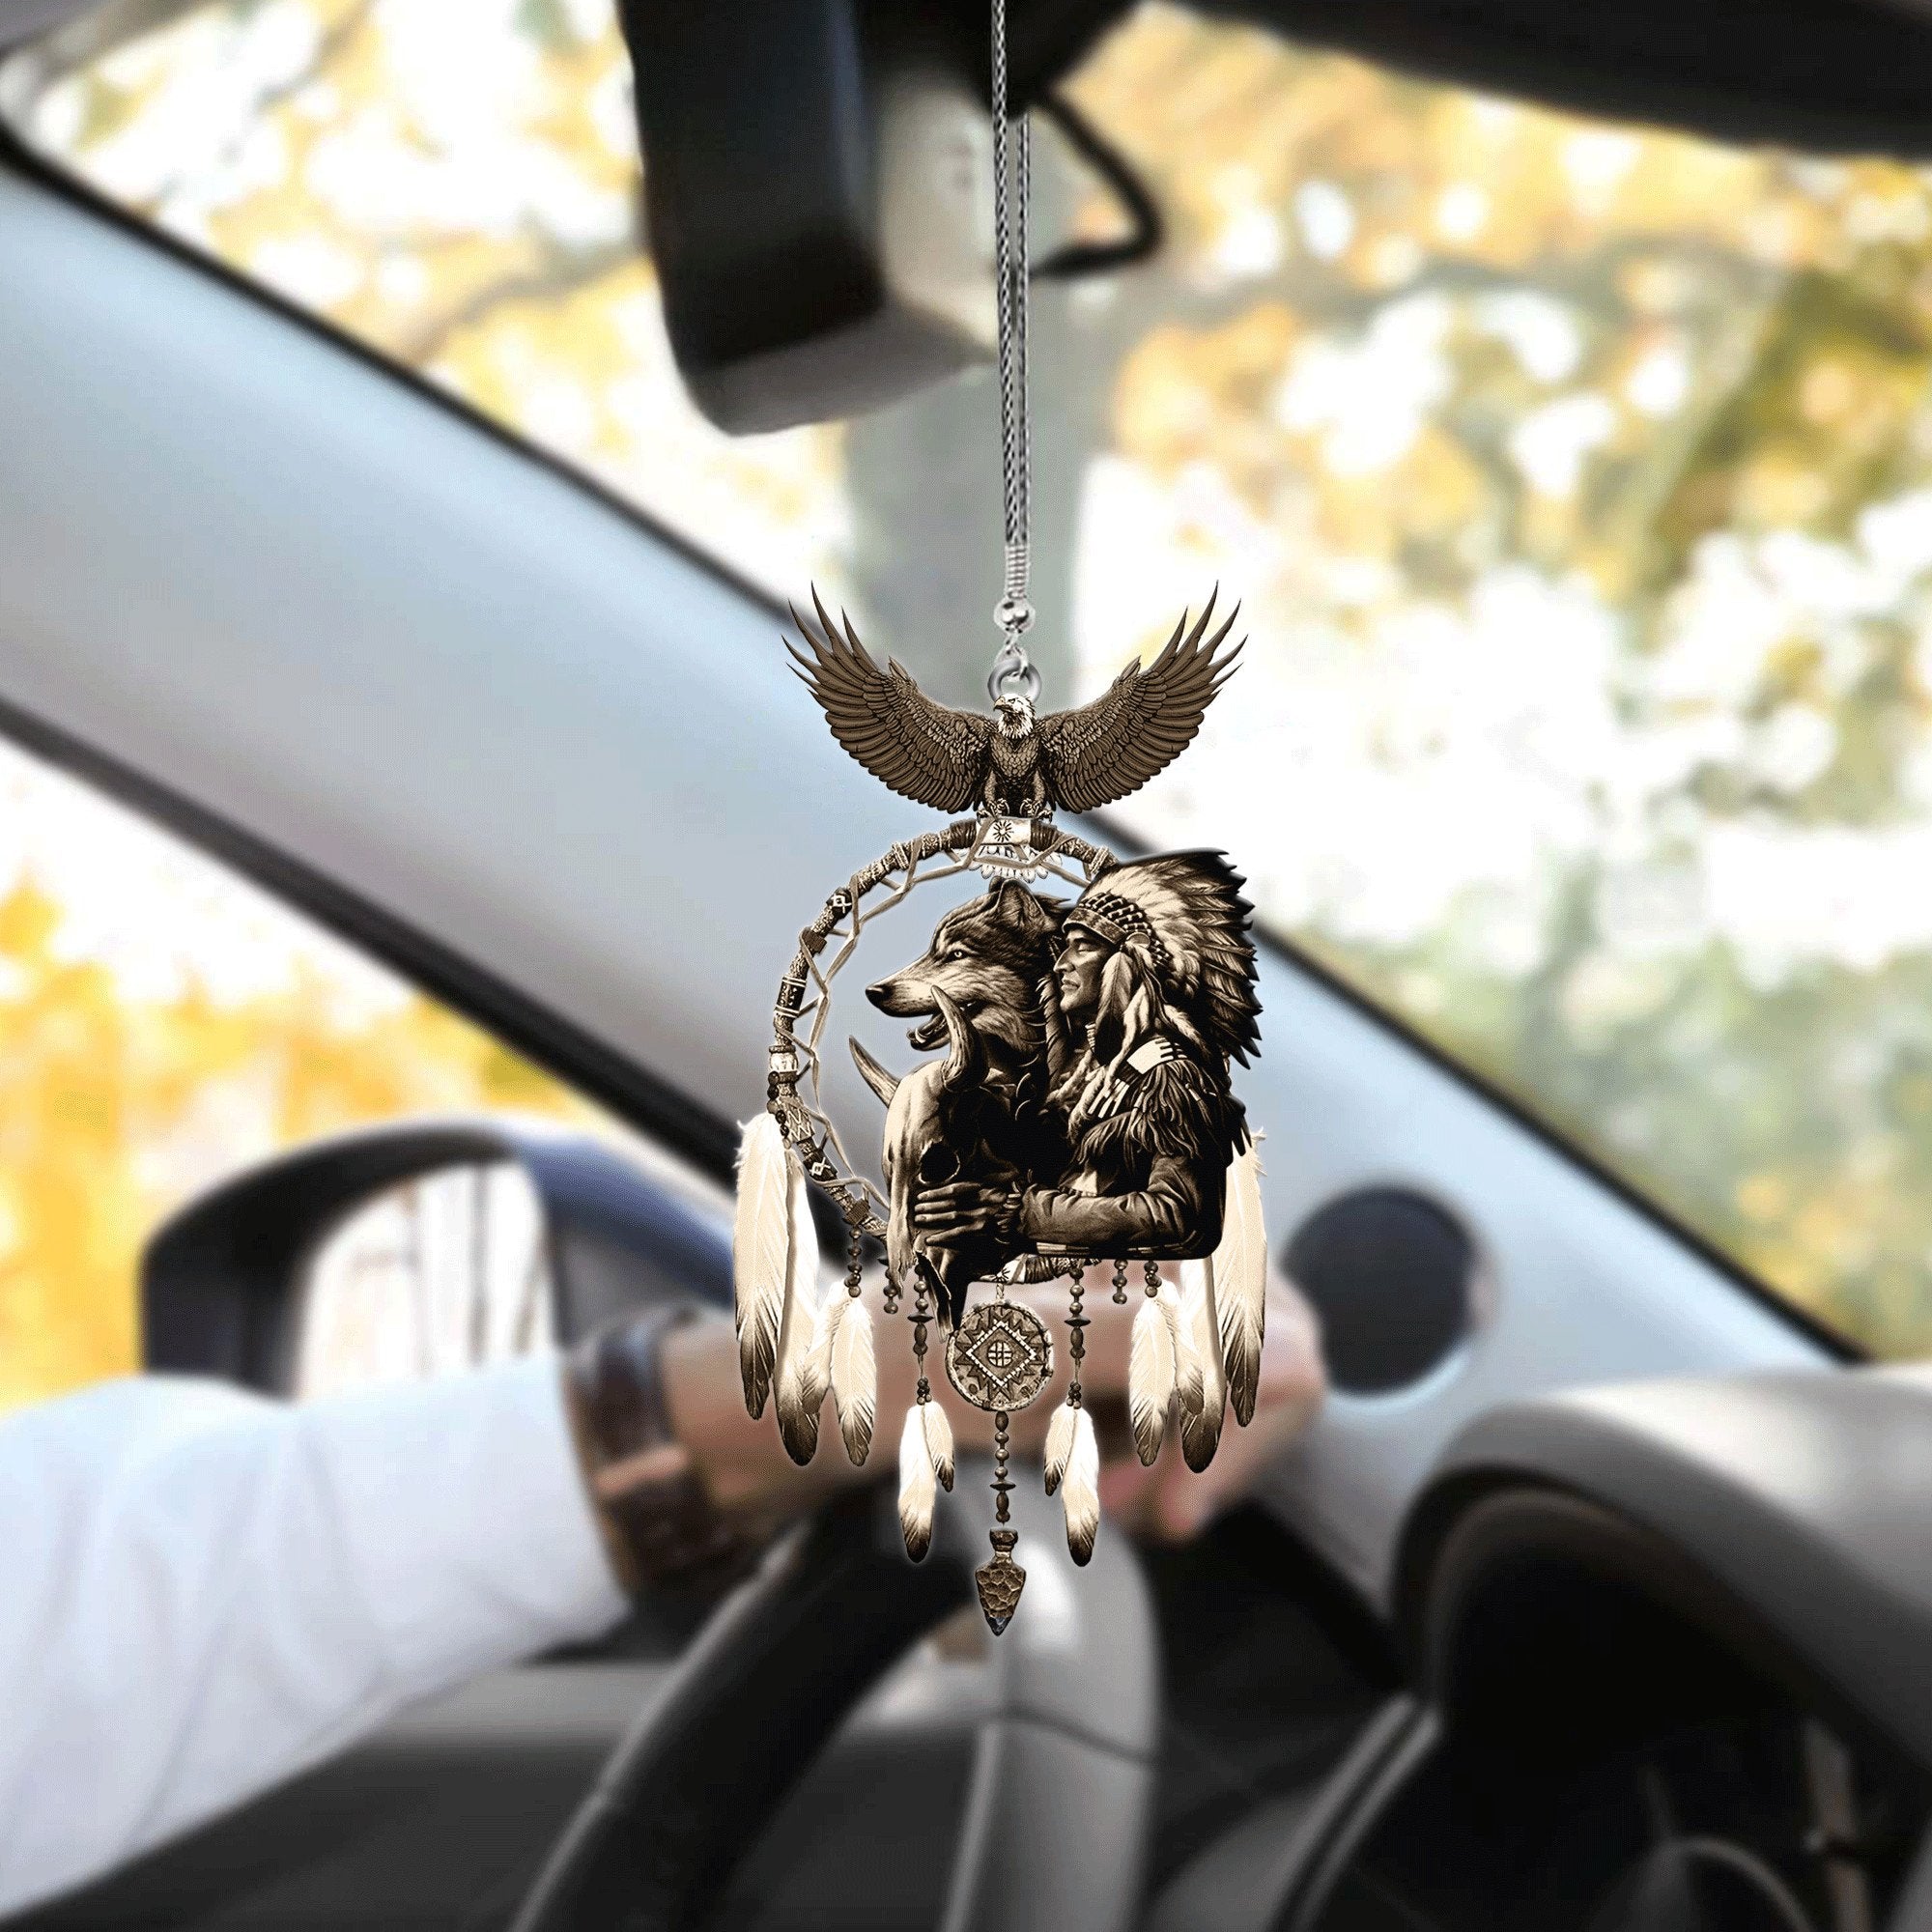 Cool Native American Hanging Ornament For Car/ Native American Car Accessories Interior